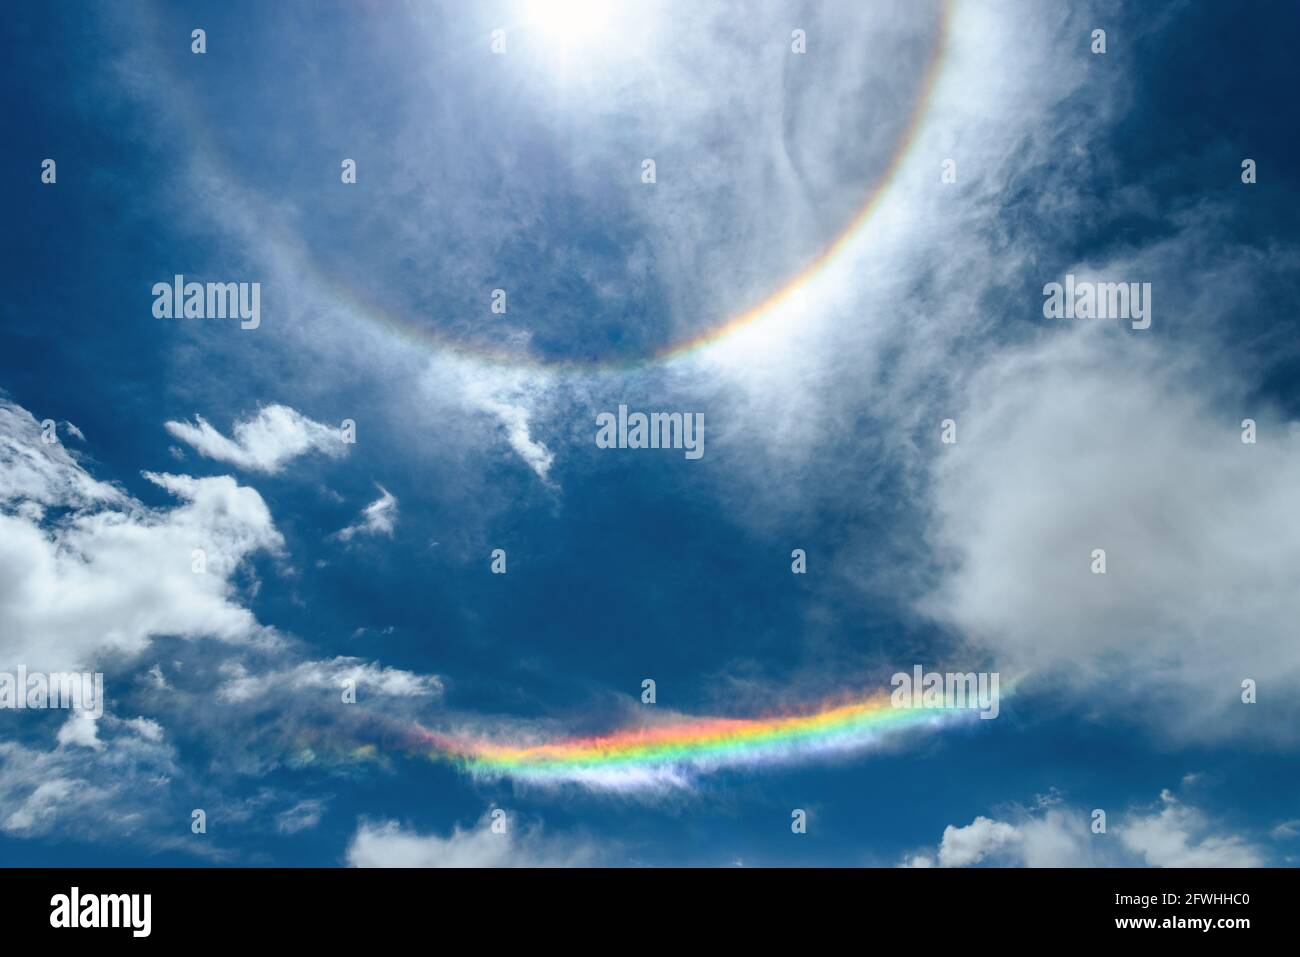 Solar halo phenomena and rainbow produced by light against the blue sky and clouds in Atacama desert, Chile Stock Photo